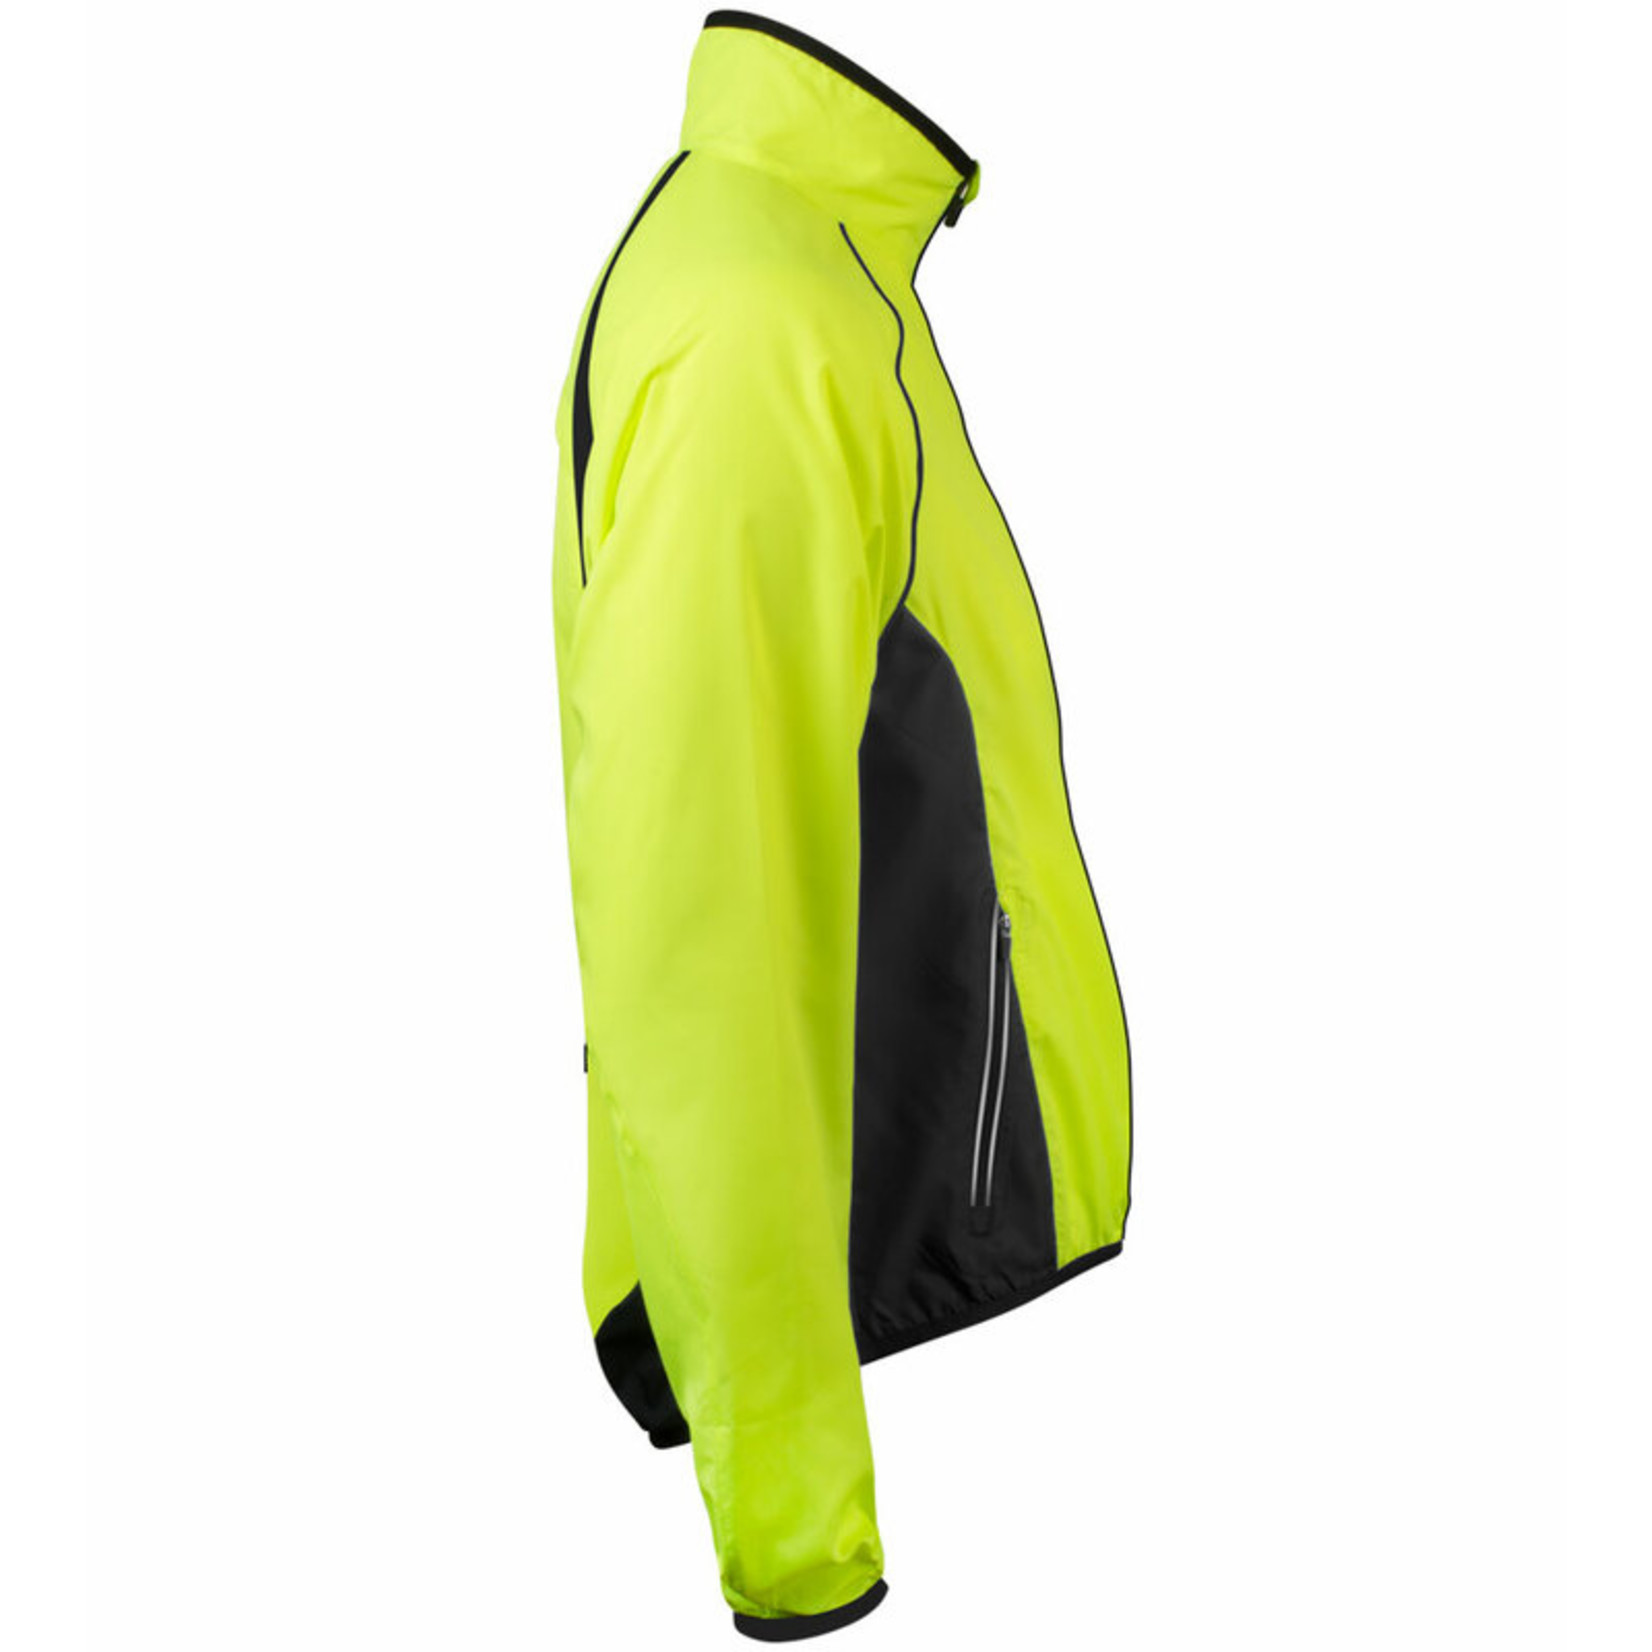 Utility Pro Class 2 Reflective Safety Jacket Mens XL Yellow Work High  Visibility | eBay